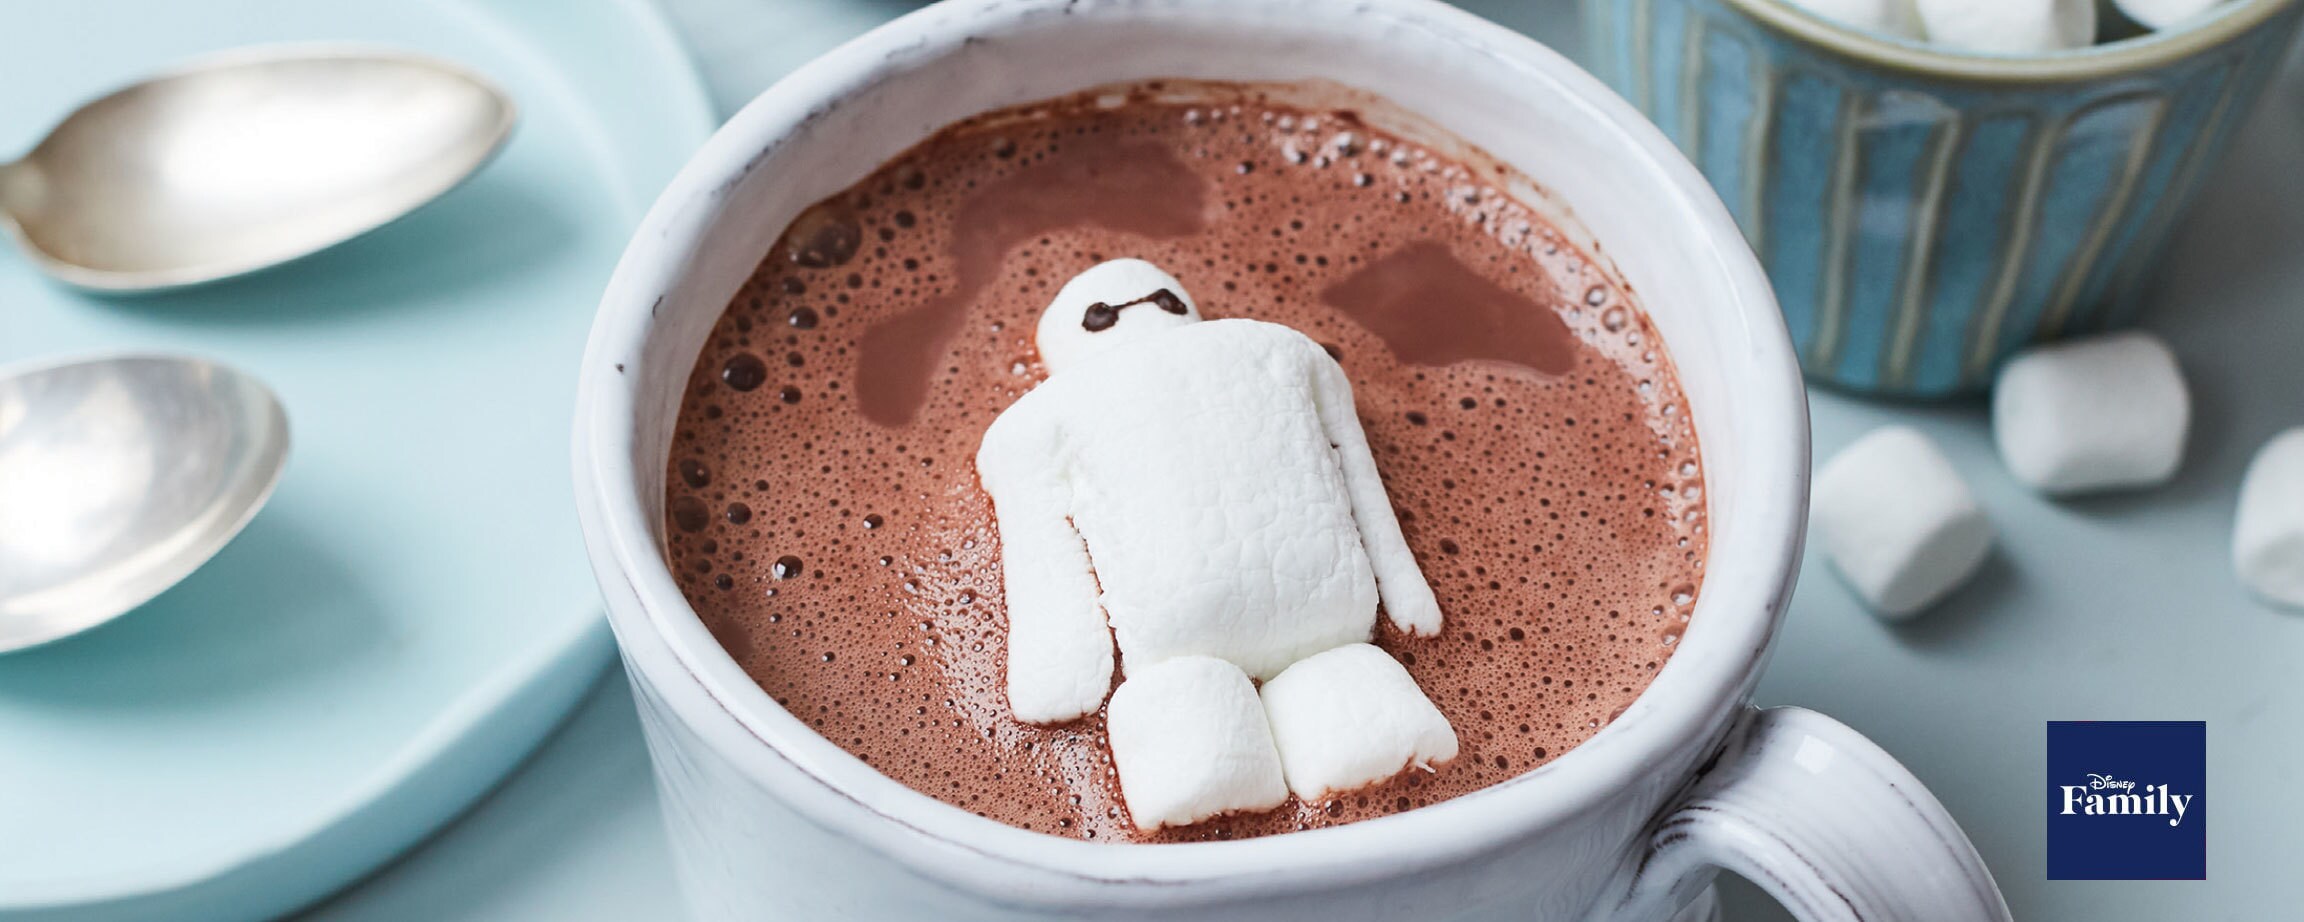 Let Baymax Take Care of Your Family With This Adorable Hot Cocoa